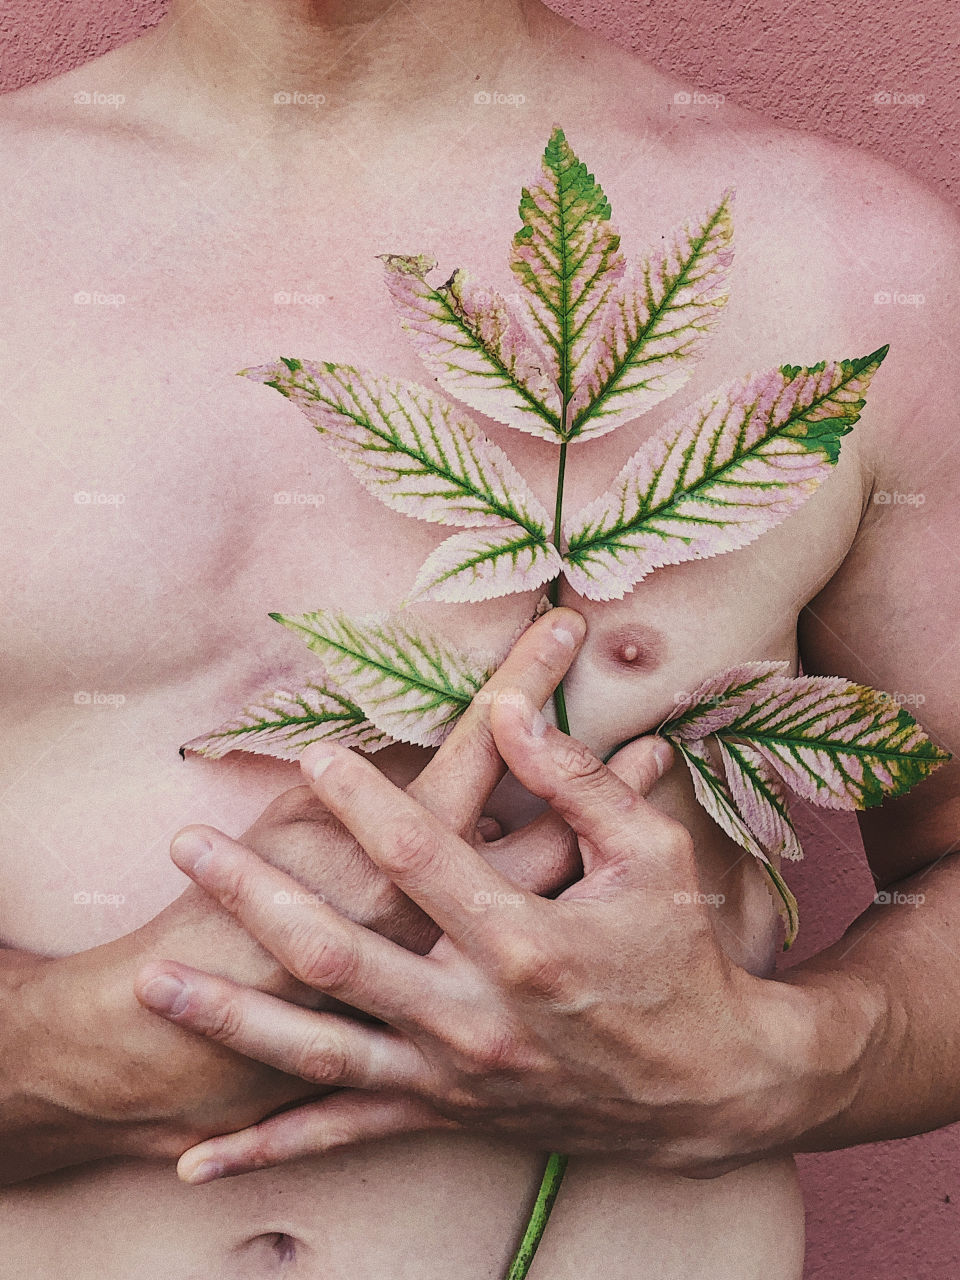 A young male holding a branch close to the skin in a gesture of connection with nature